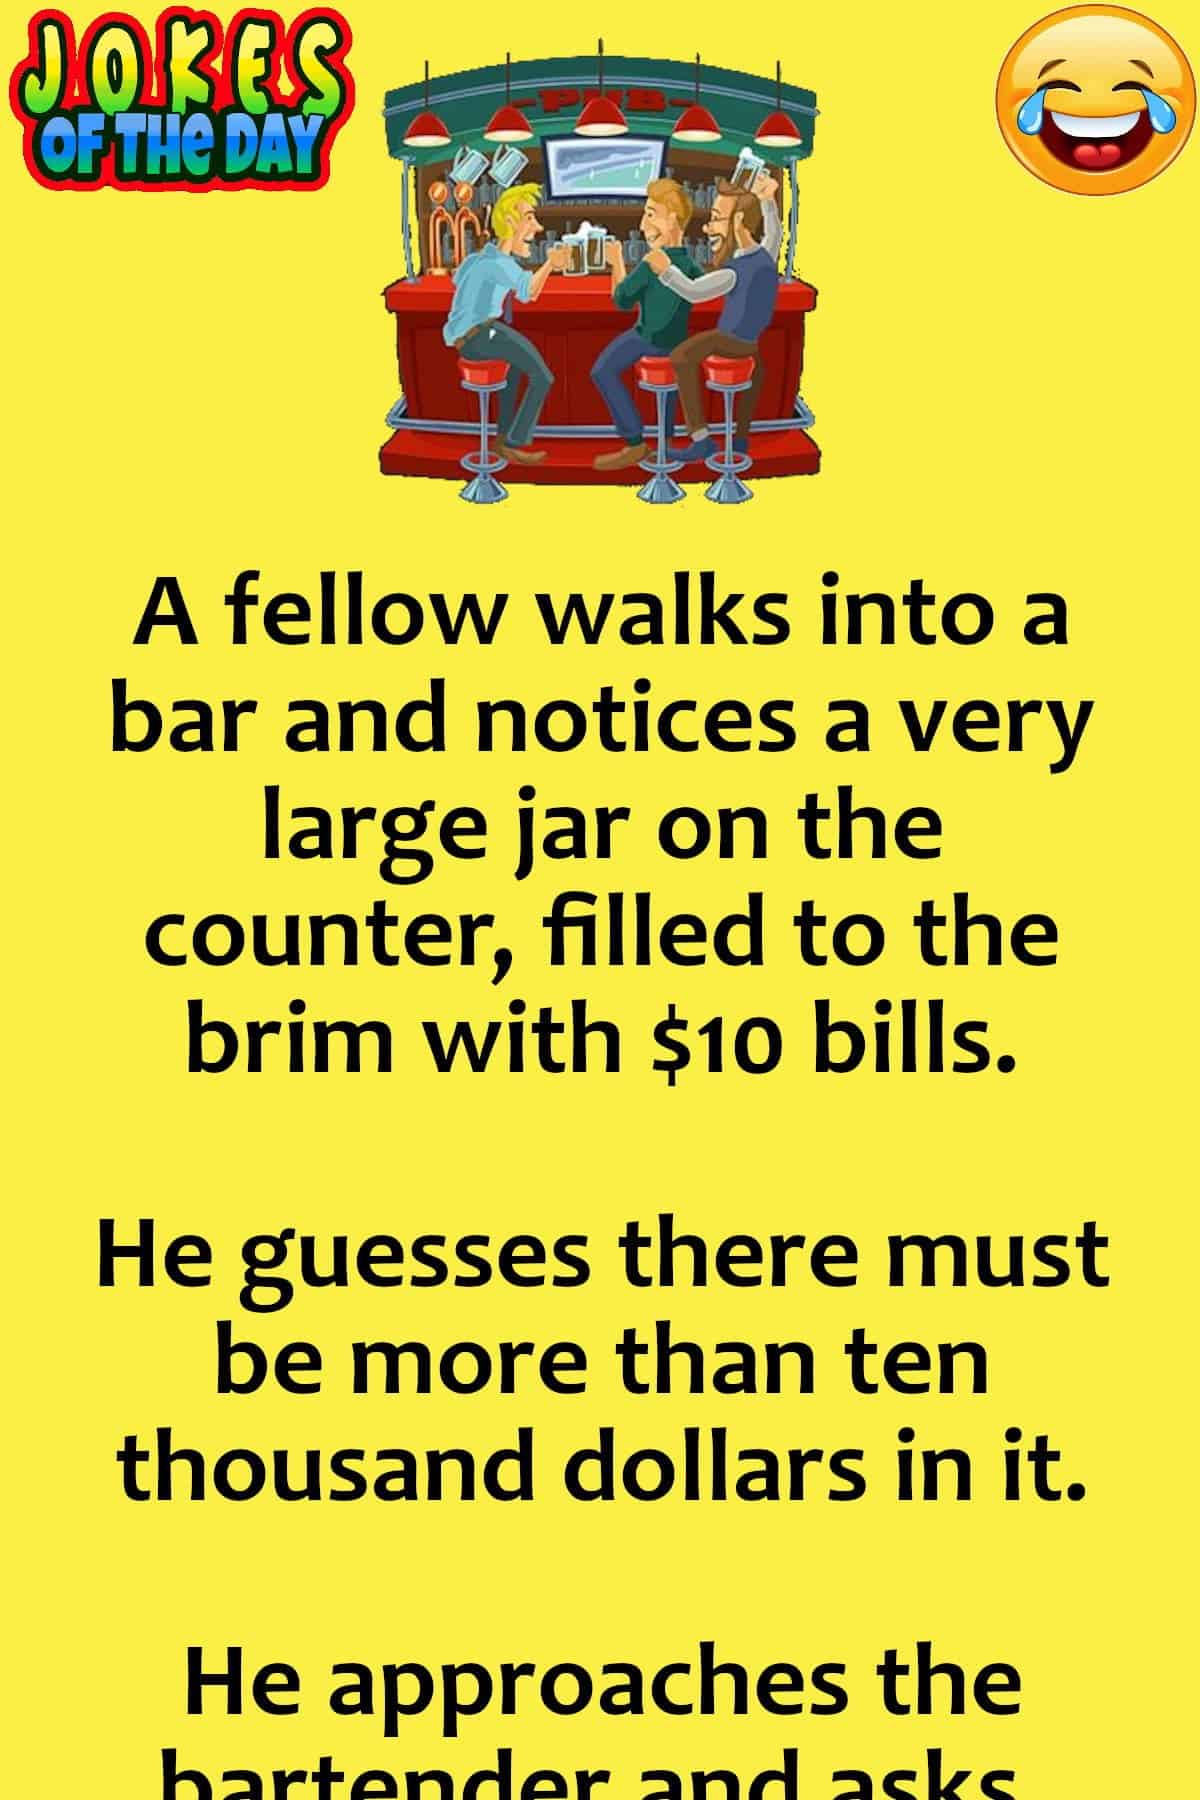 Silly Joke - A man takes the bartenders bet